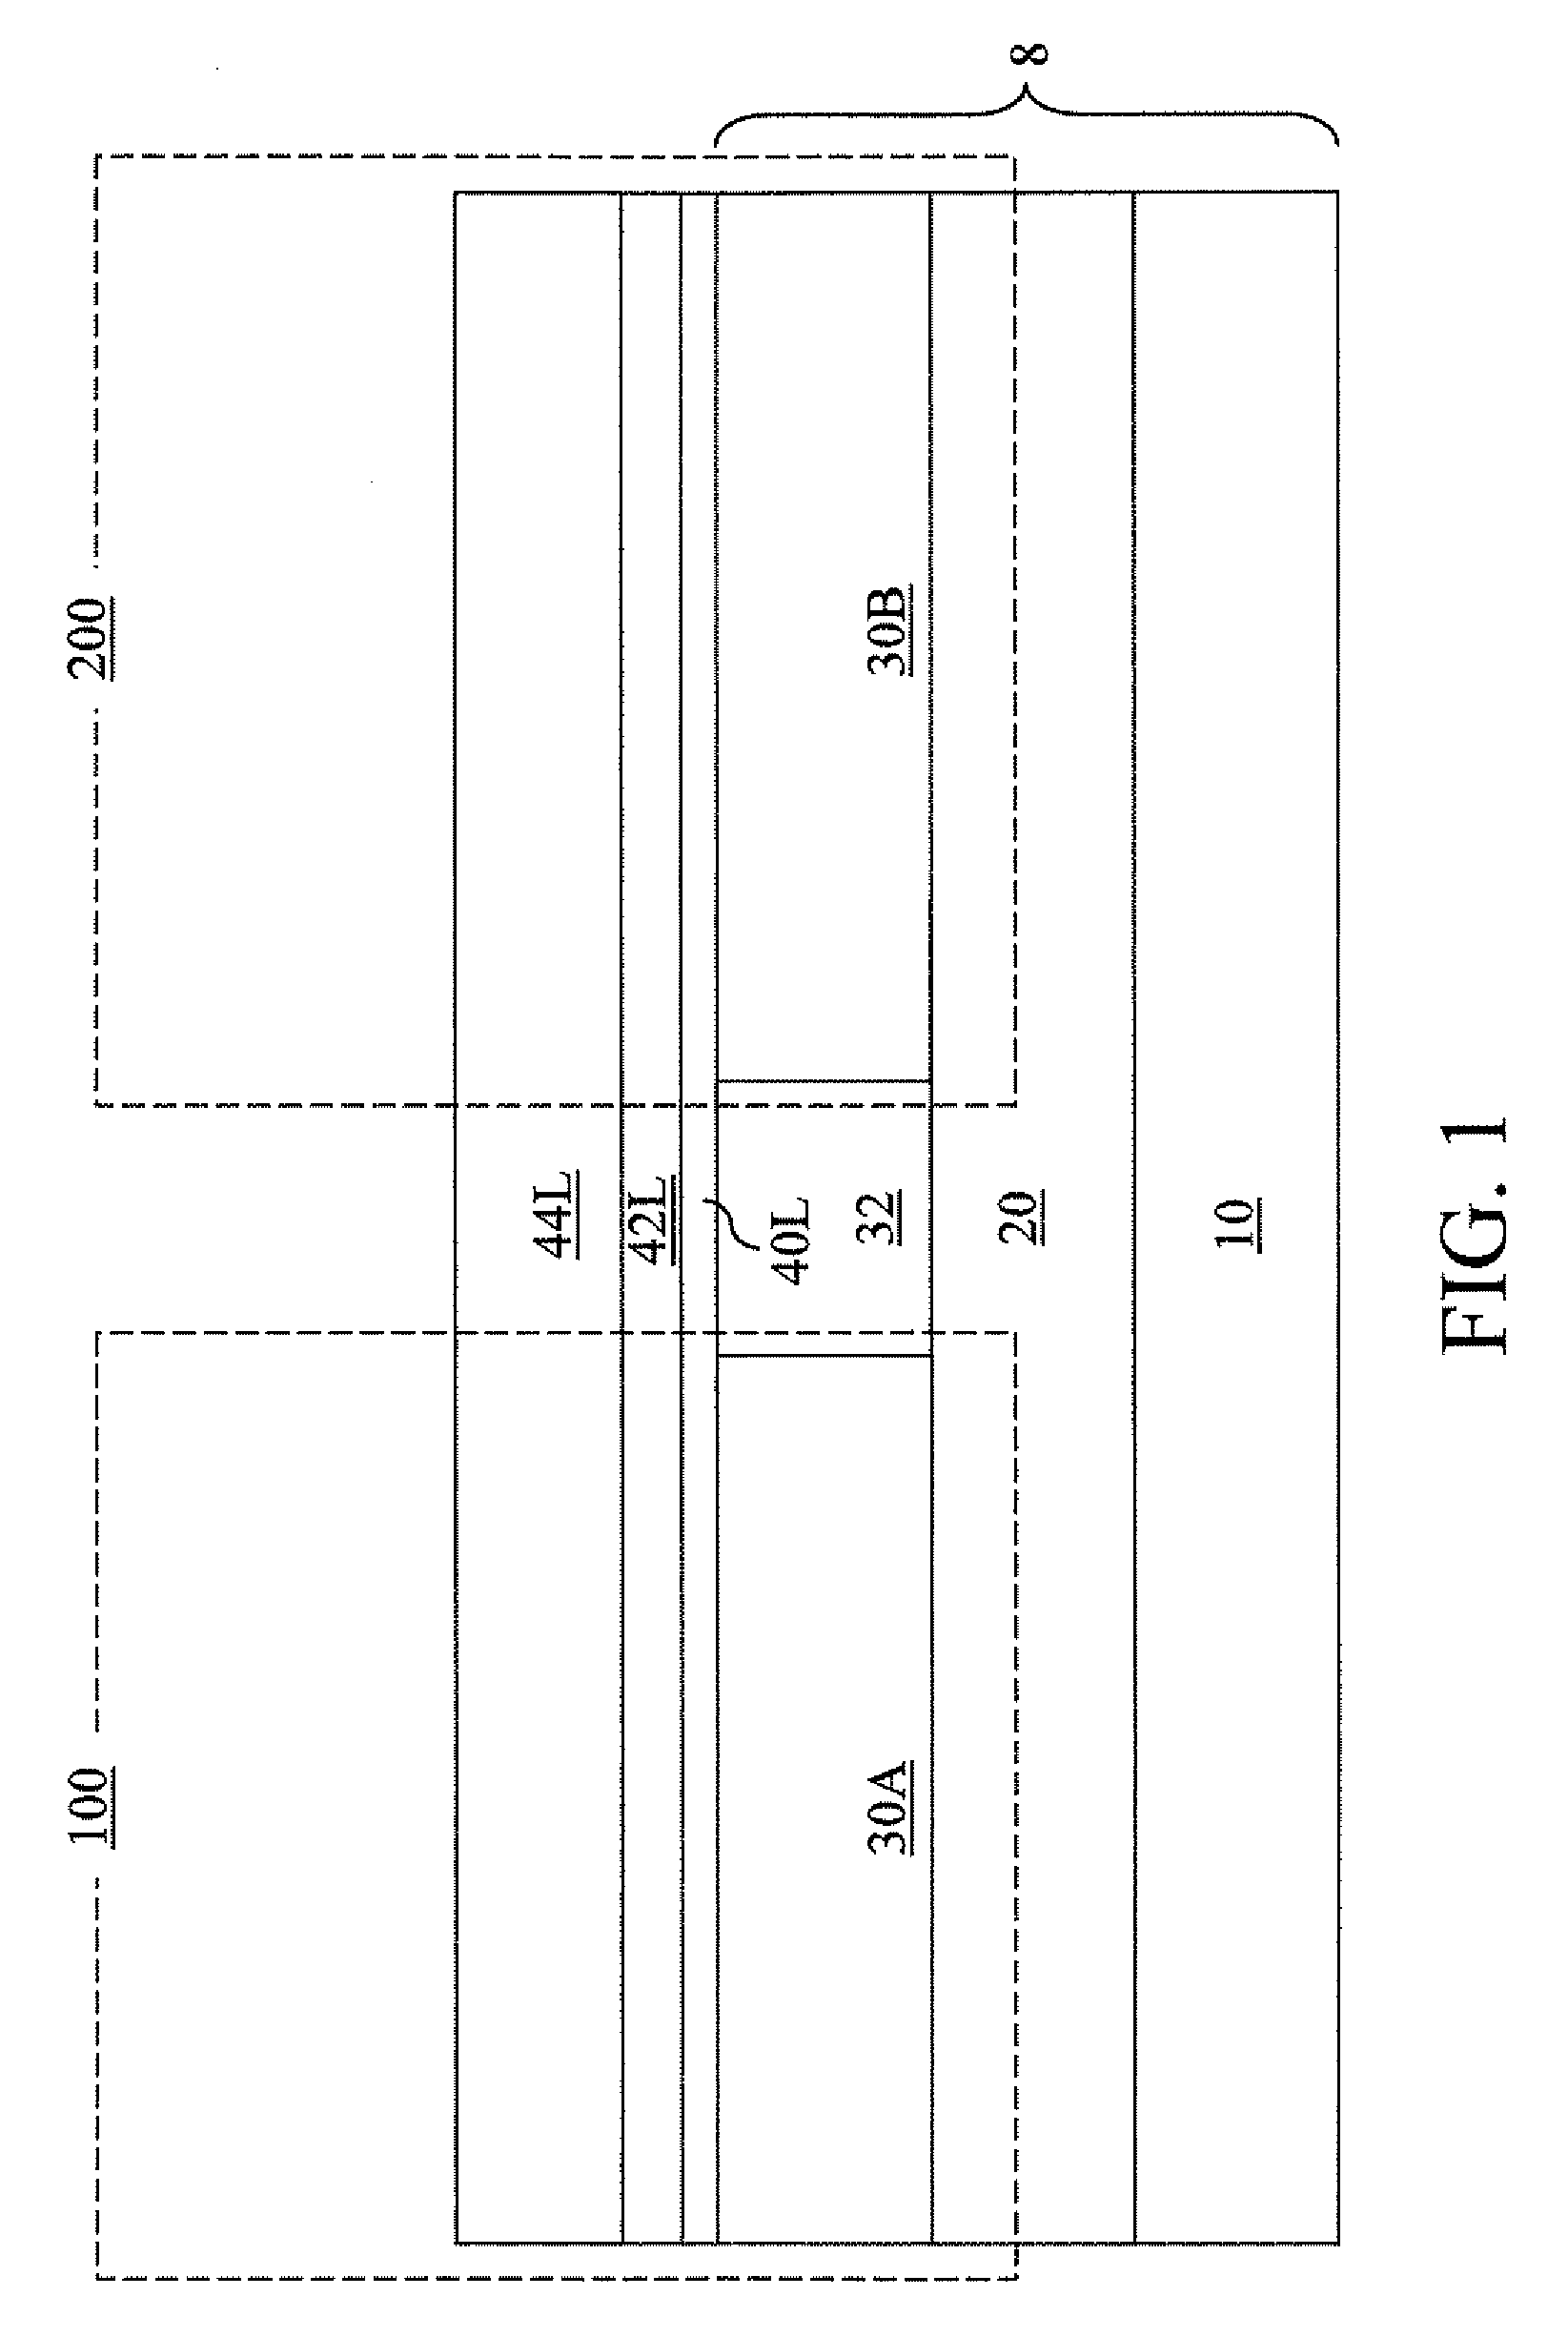 CMOS integration scheme employing a silicide electrode and a silicide-germanide alloy electrode